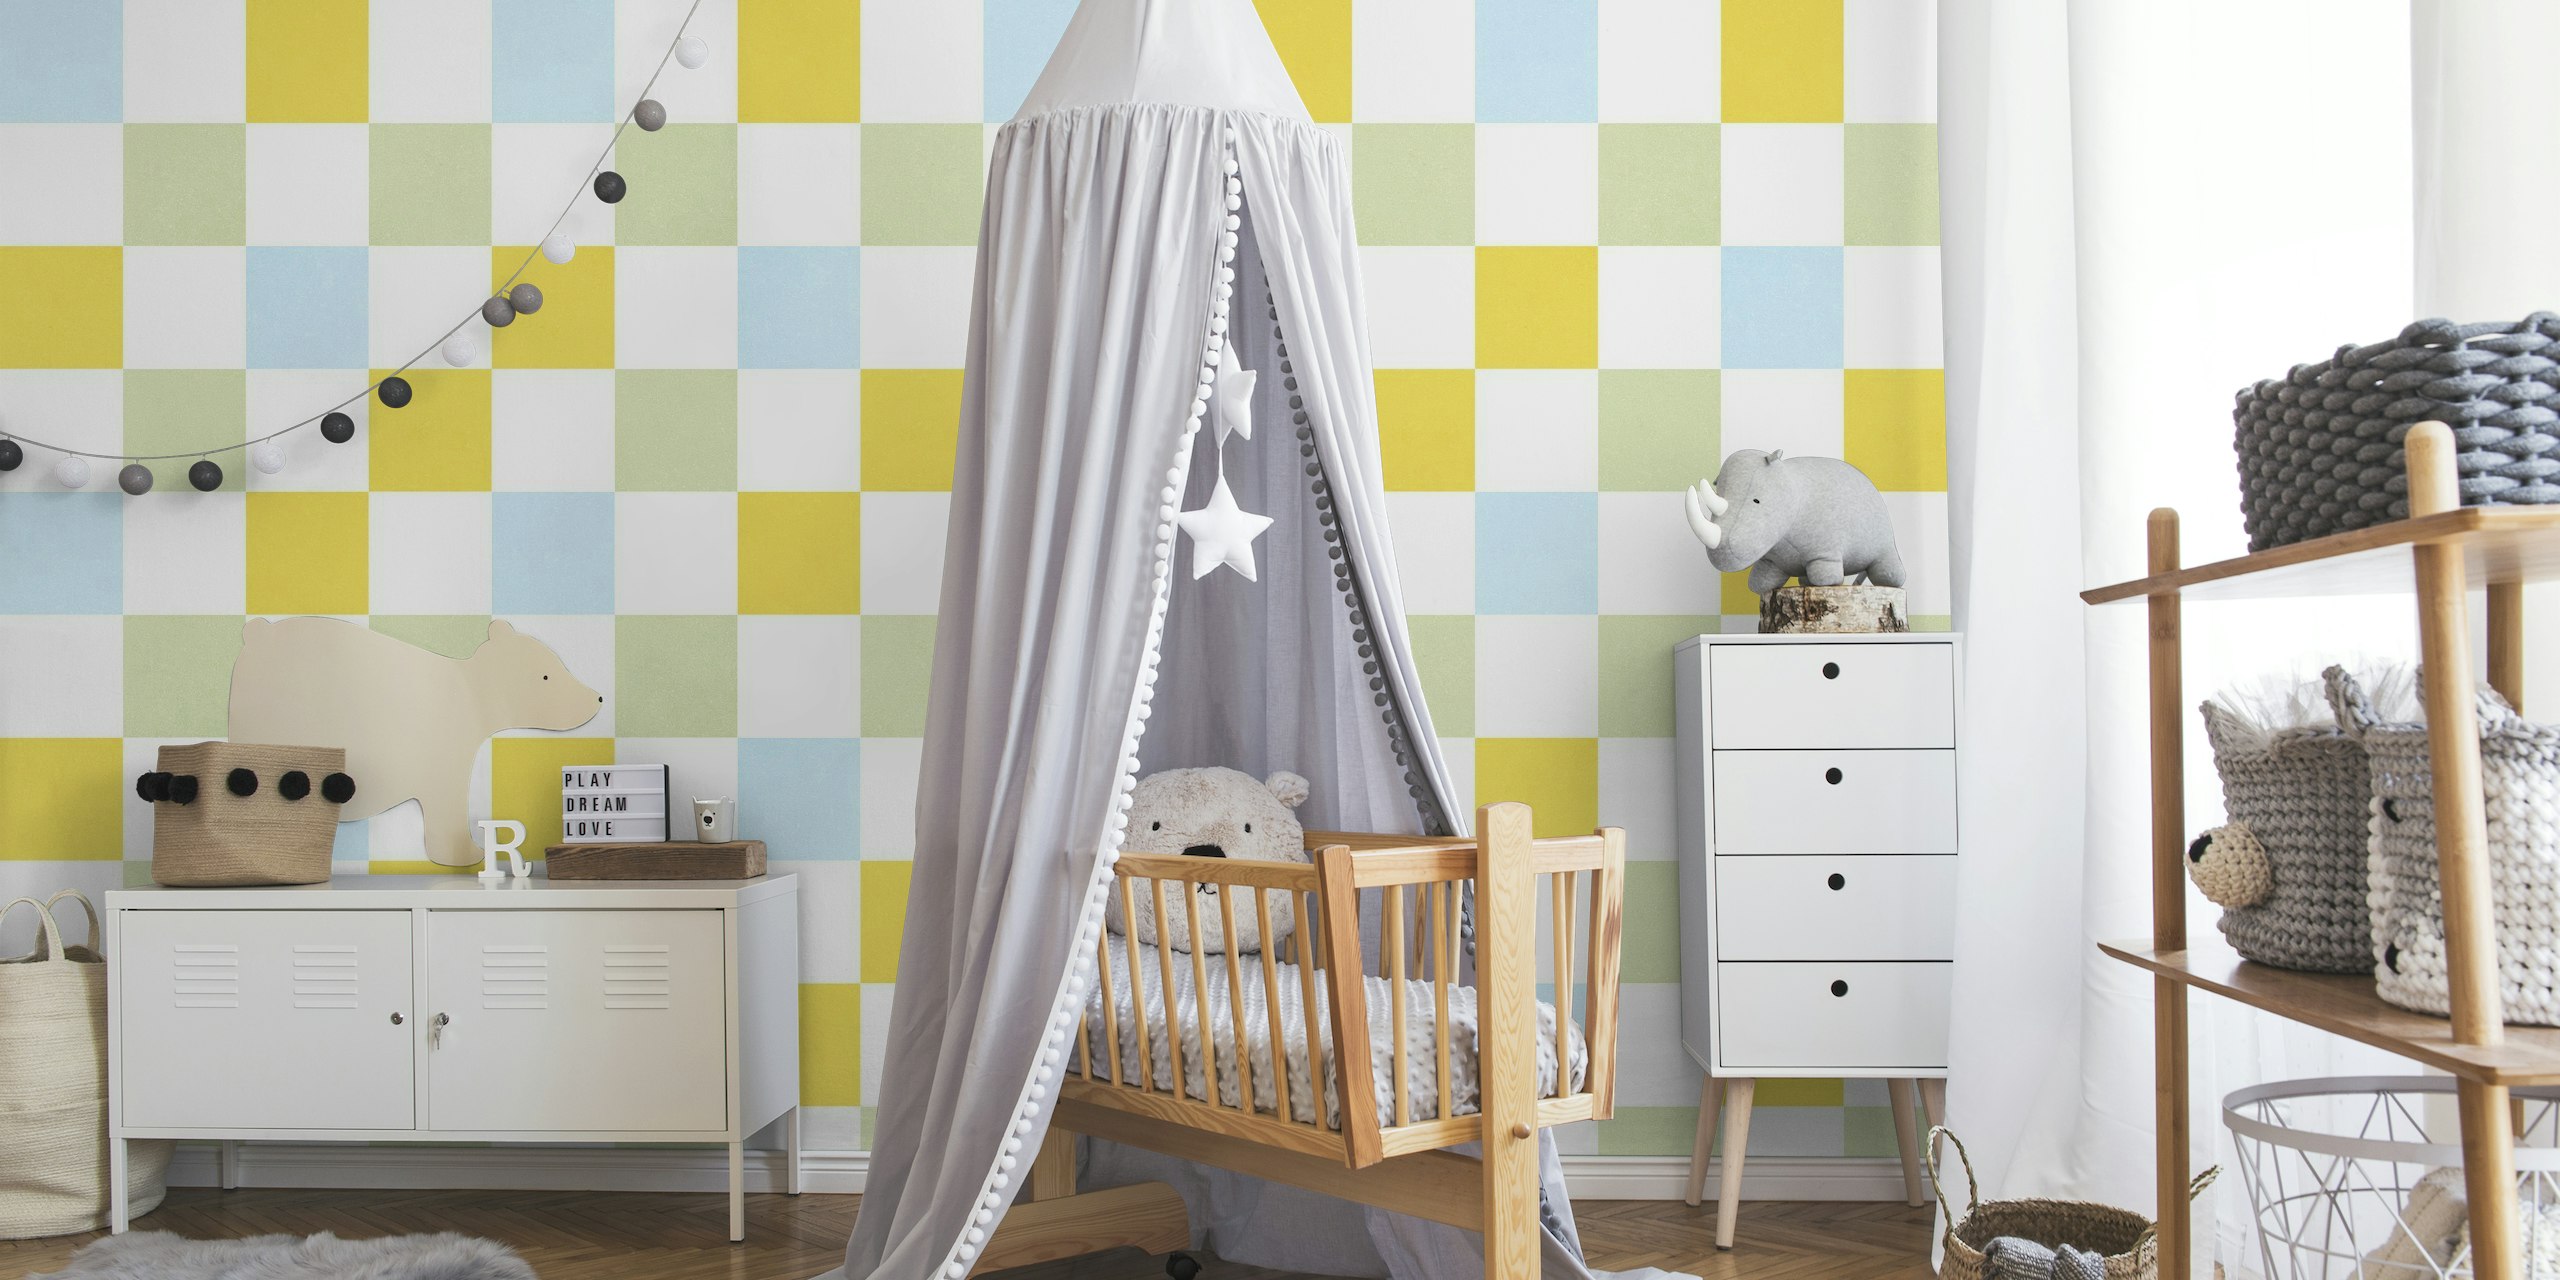 Retro Pastel Checkered Wall Mural in Sunny Green, Yellow, and Blue